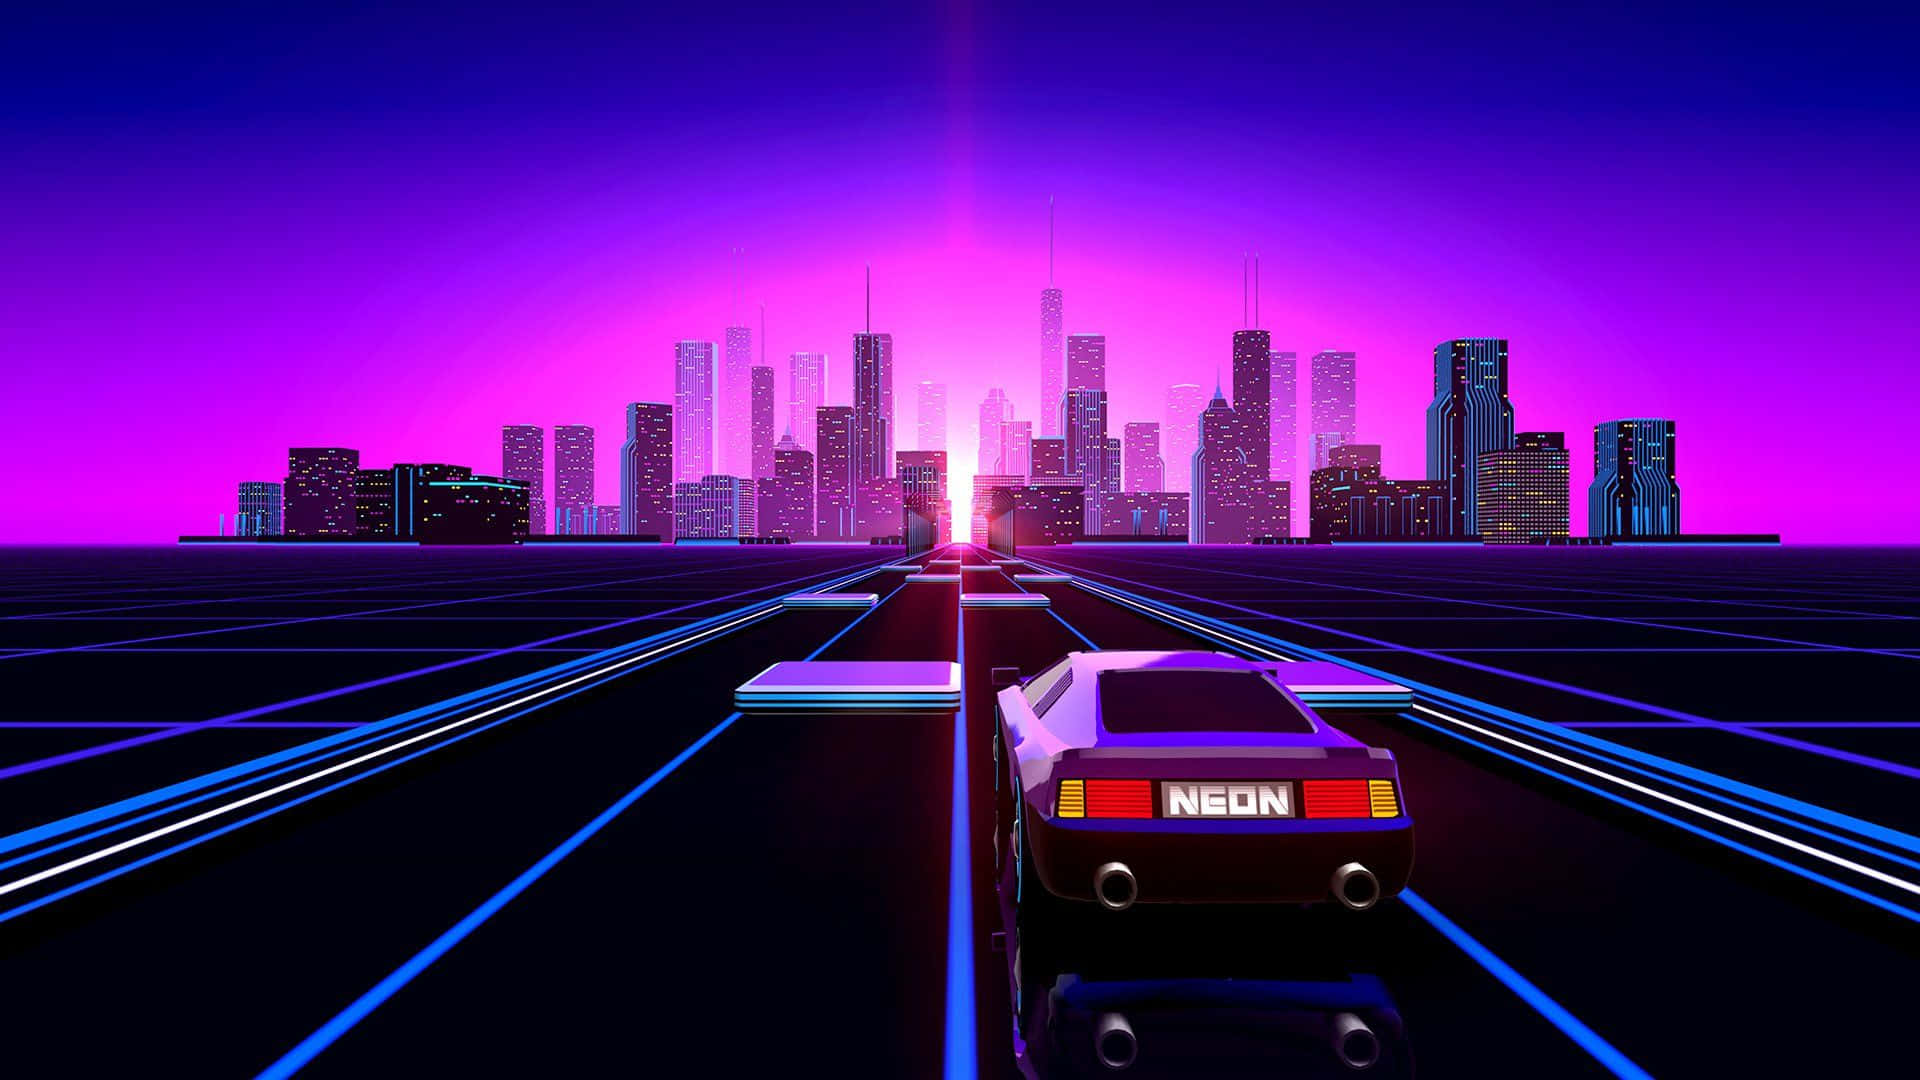 Step Back to the 80s in Neon Glowing Colors Wallpaper